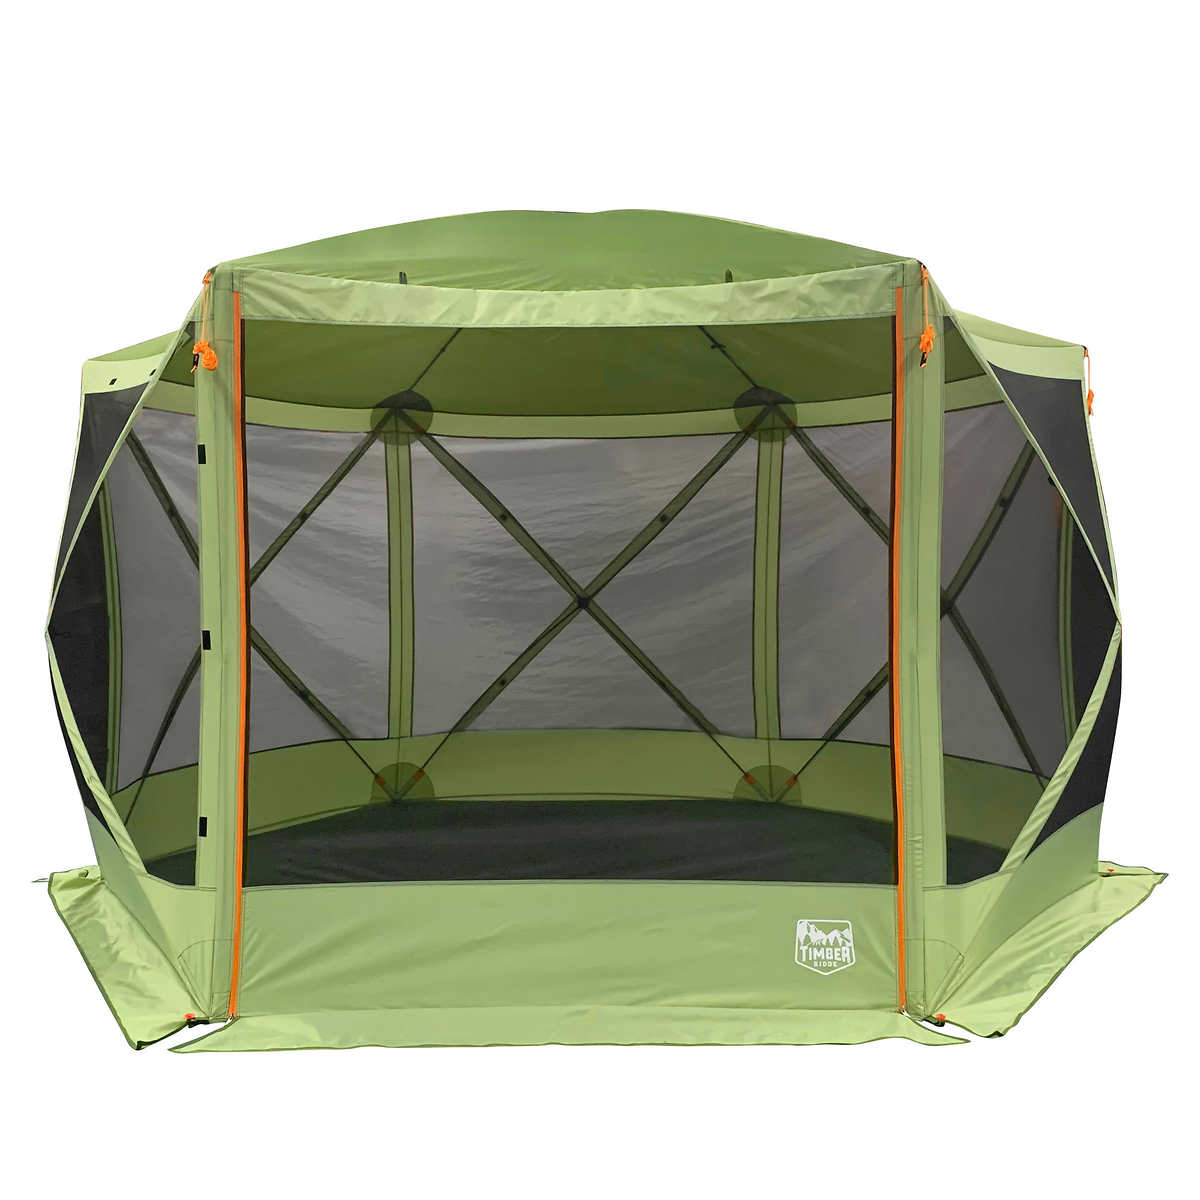 Core Equipment 6-Person Tent w/ Screenhouse Only $119.99 Shipped on Costco.com  (Regularly $160)